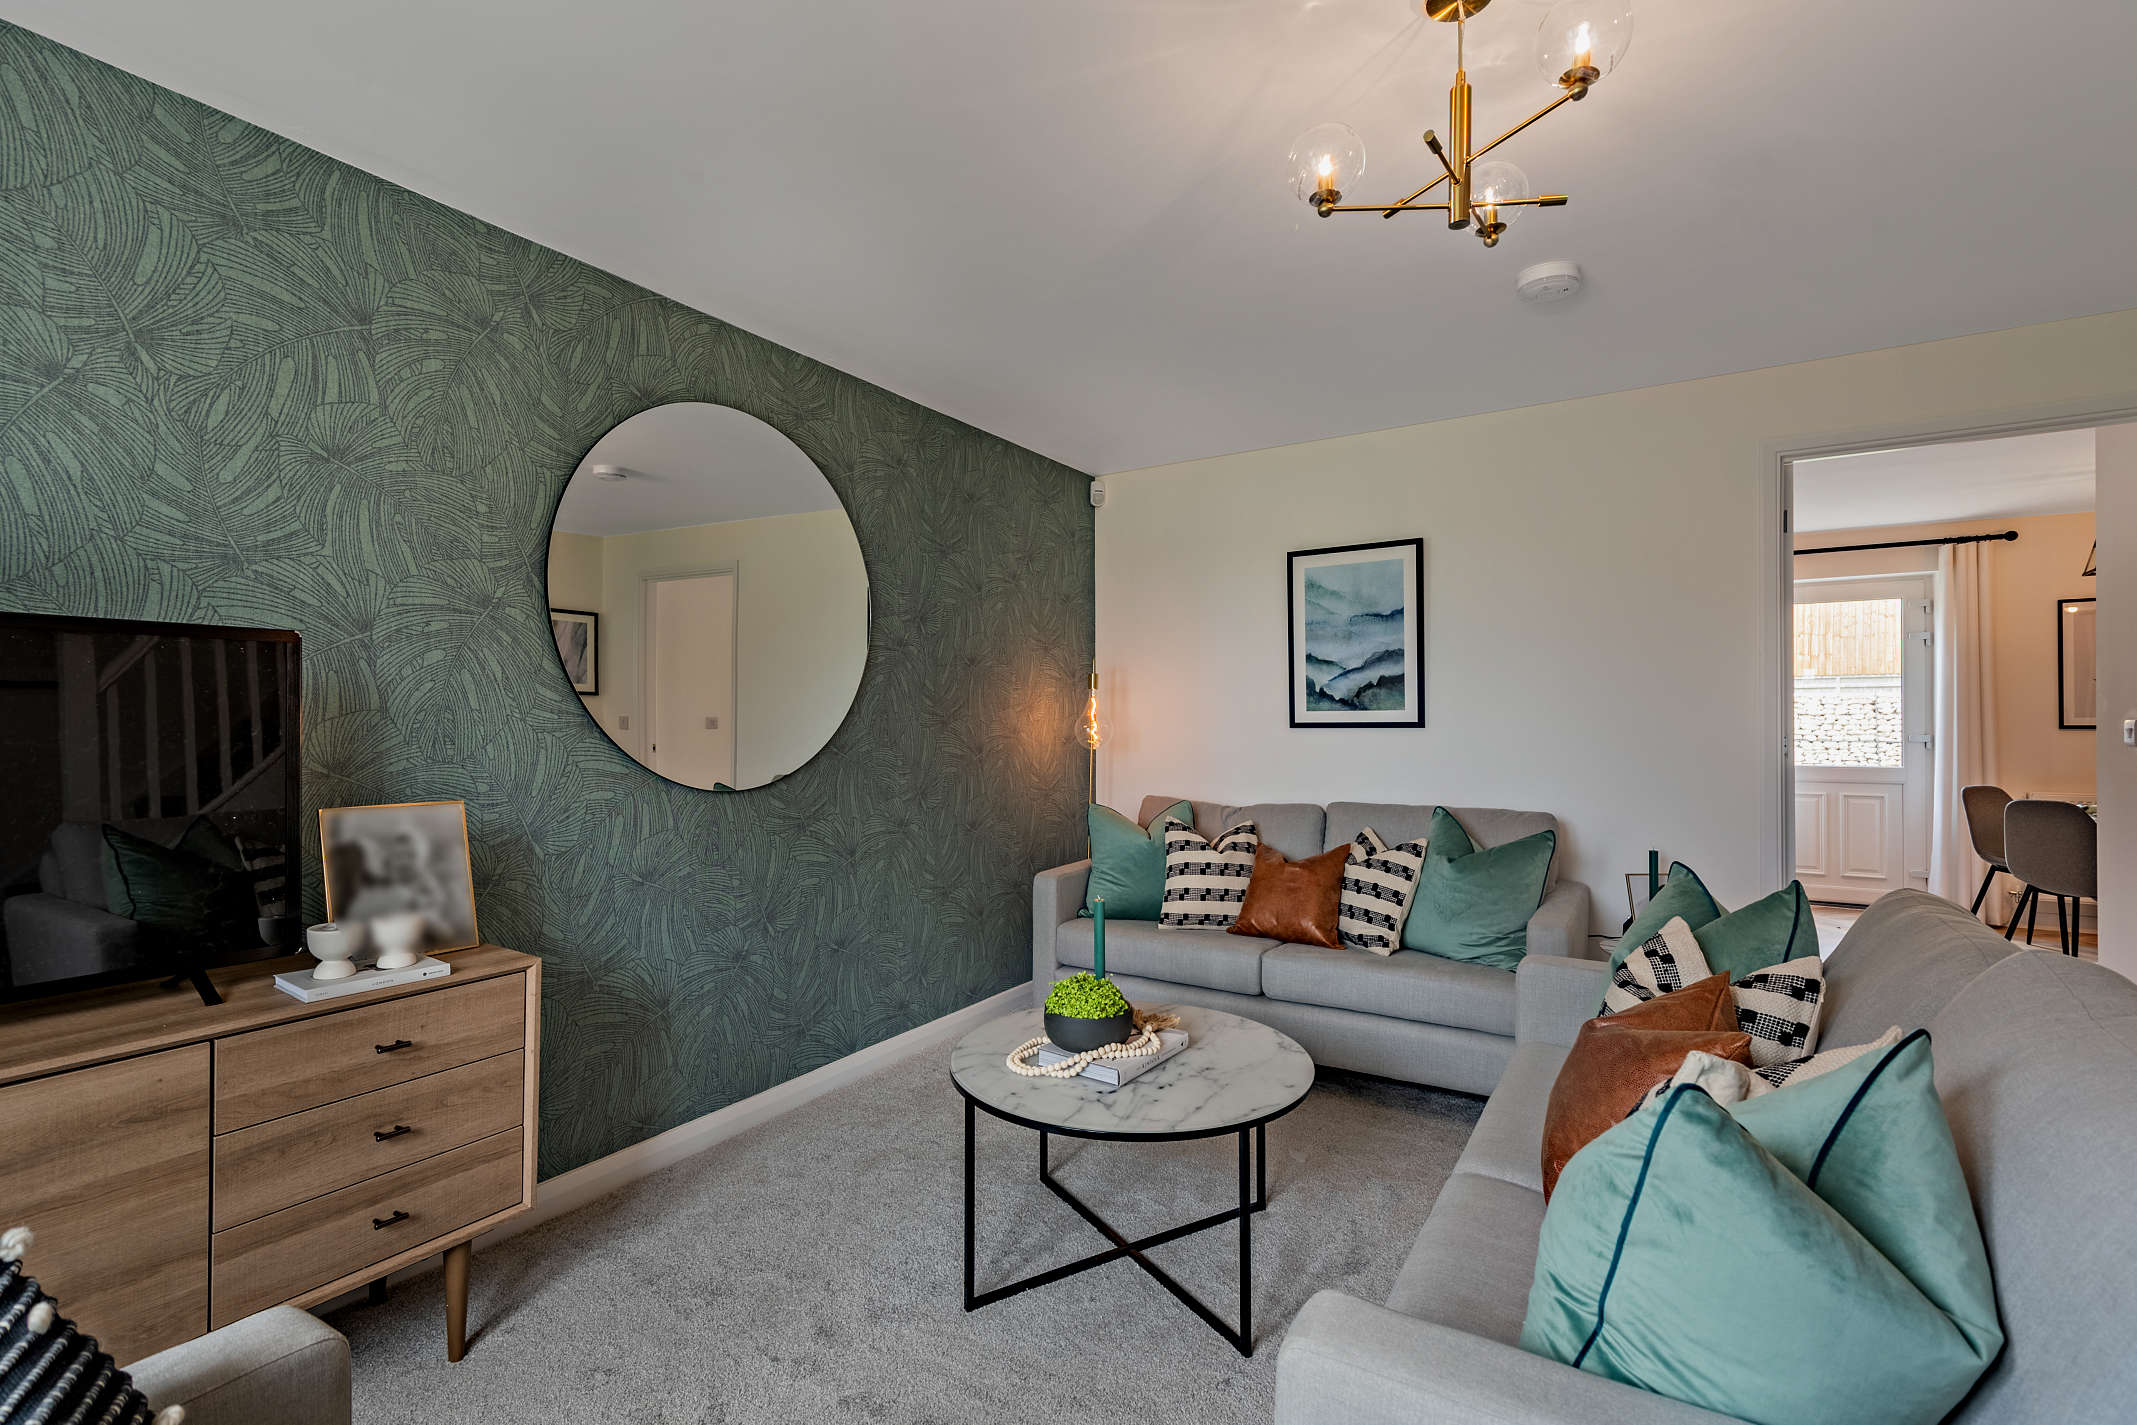 Living room with green decorative wall paper and modern interior located at The Spires in Great Gonerby. A development by Longhurst Group